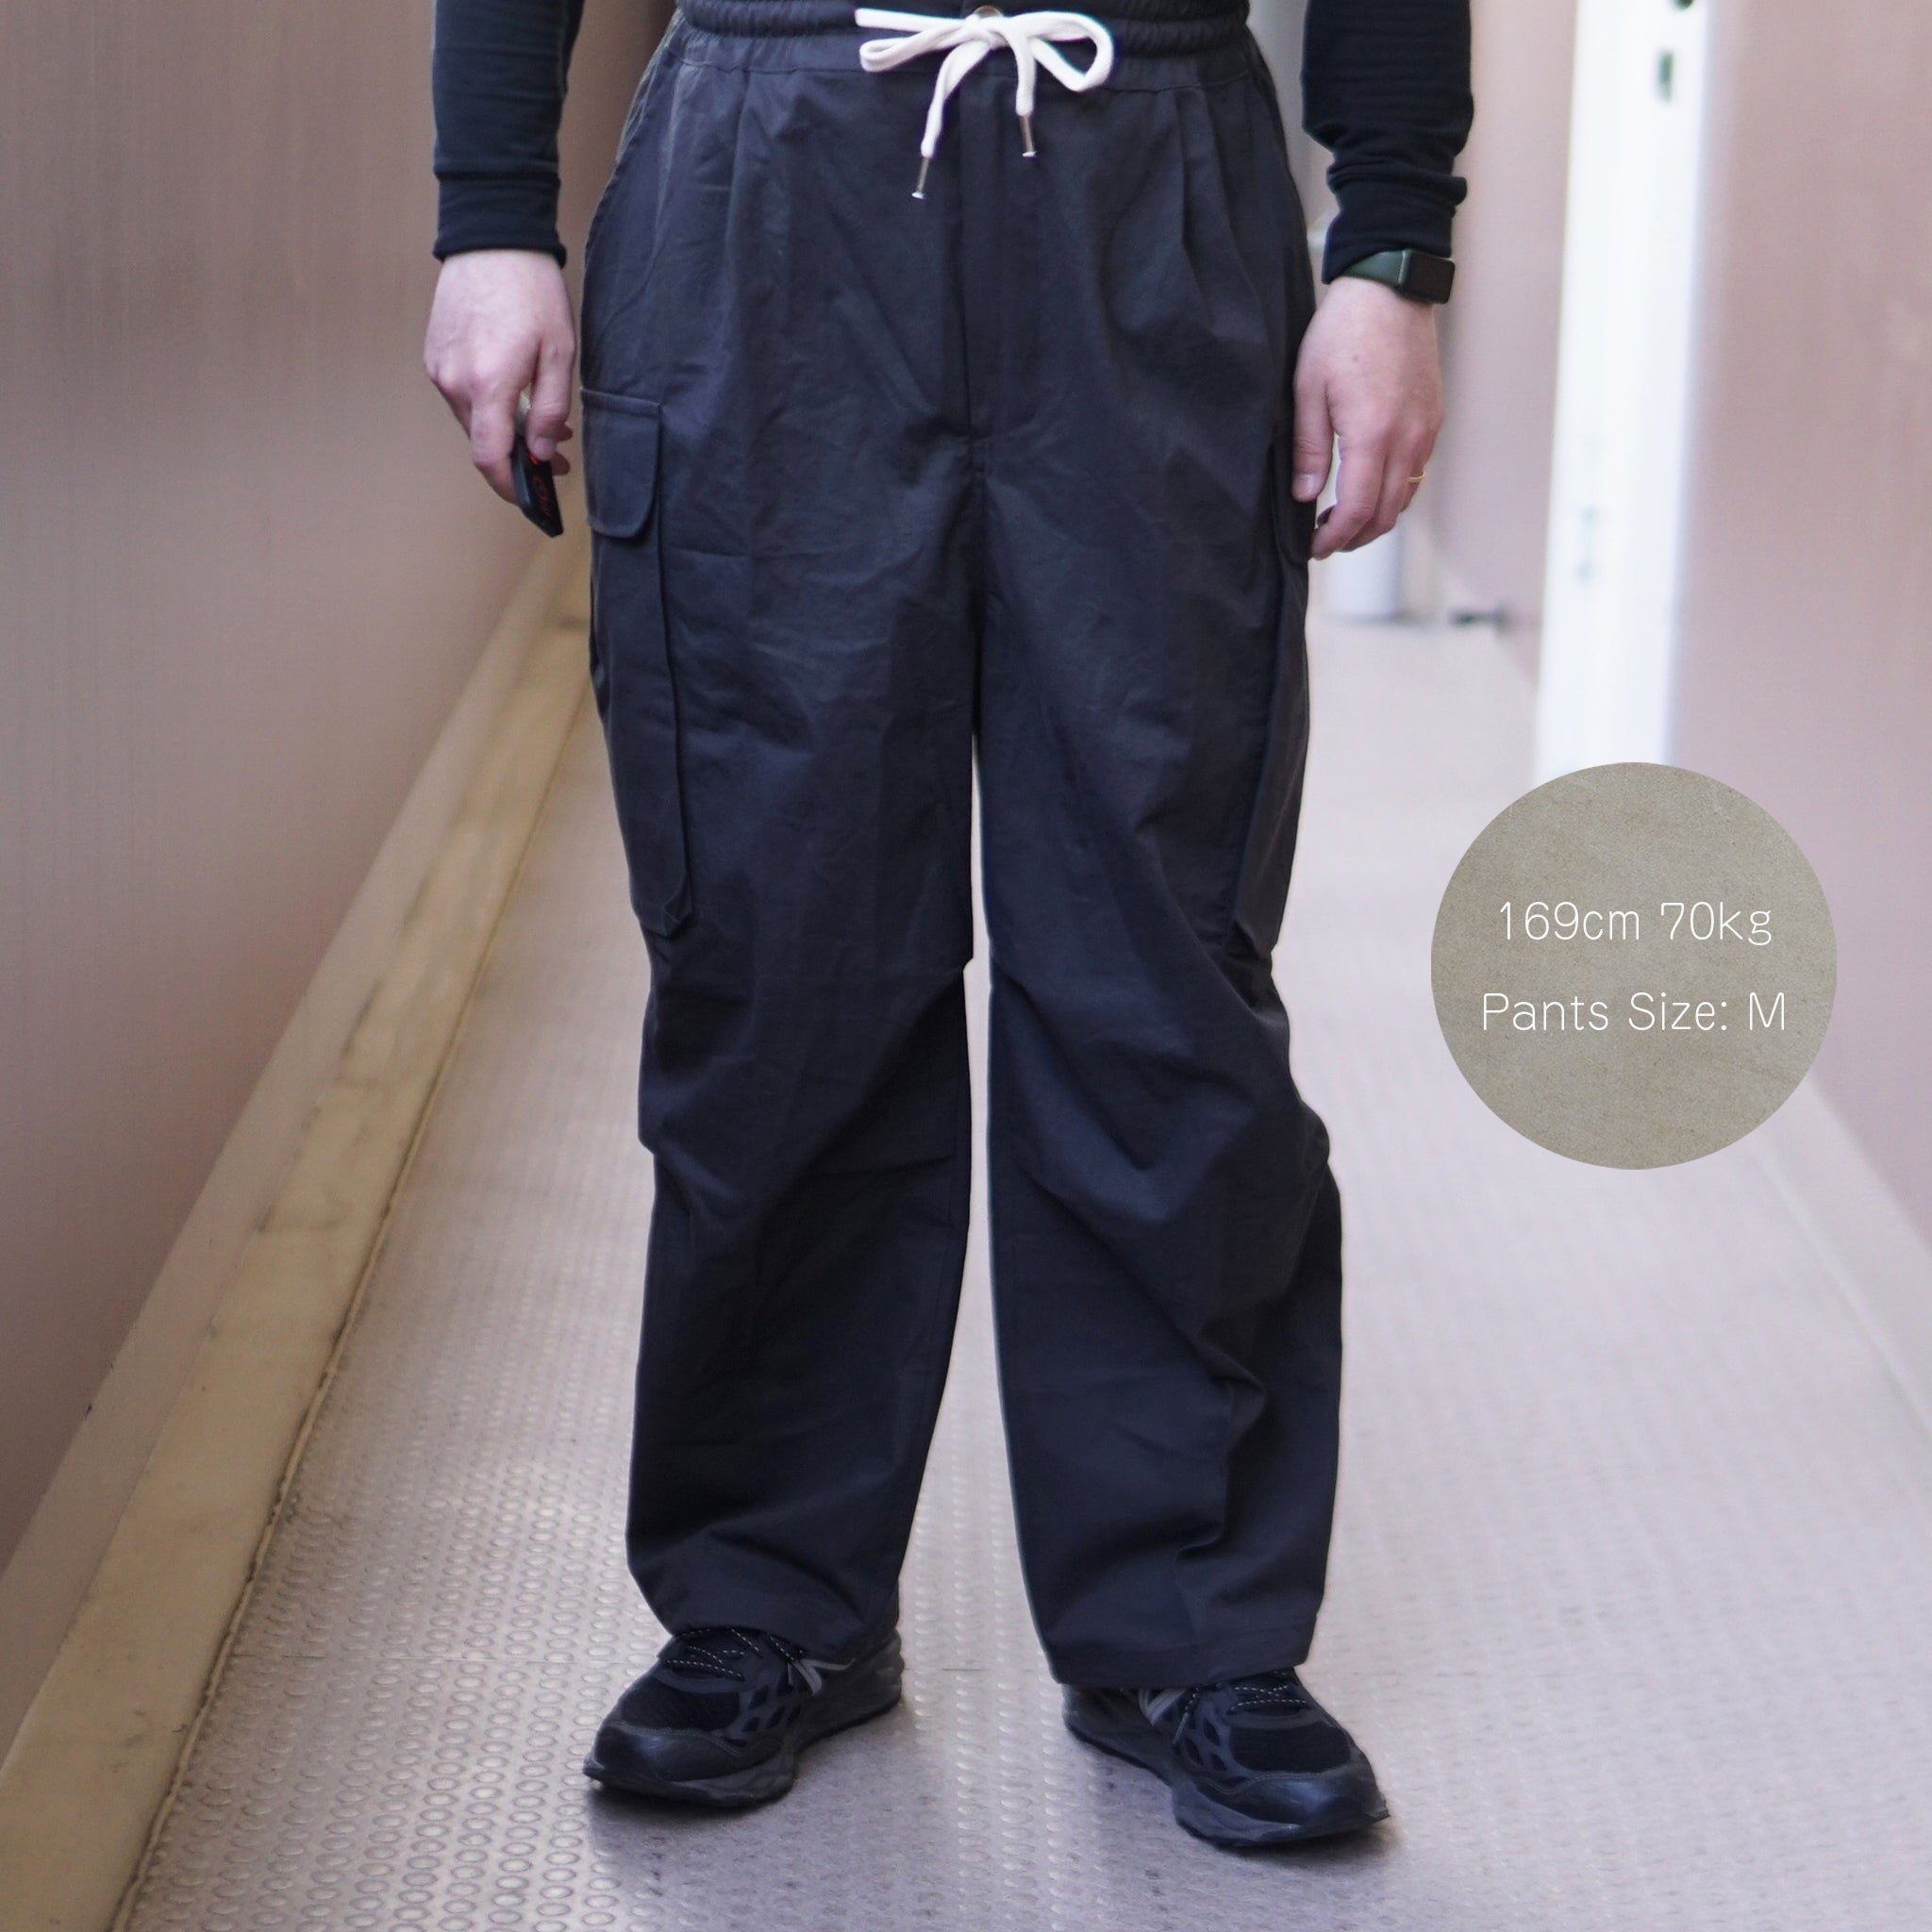 No:cbwidep | Name:Cb WIDE CARGOPANTS| Color:Black/Airforce【CONICHIWA BONJOUR_コニチワボンジュール】